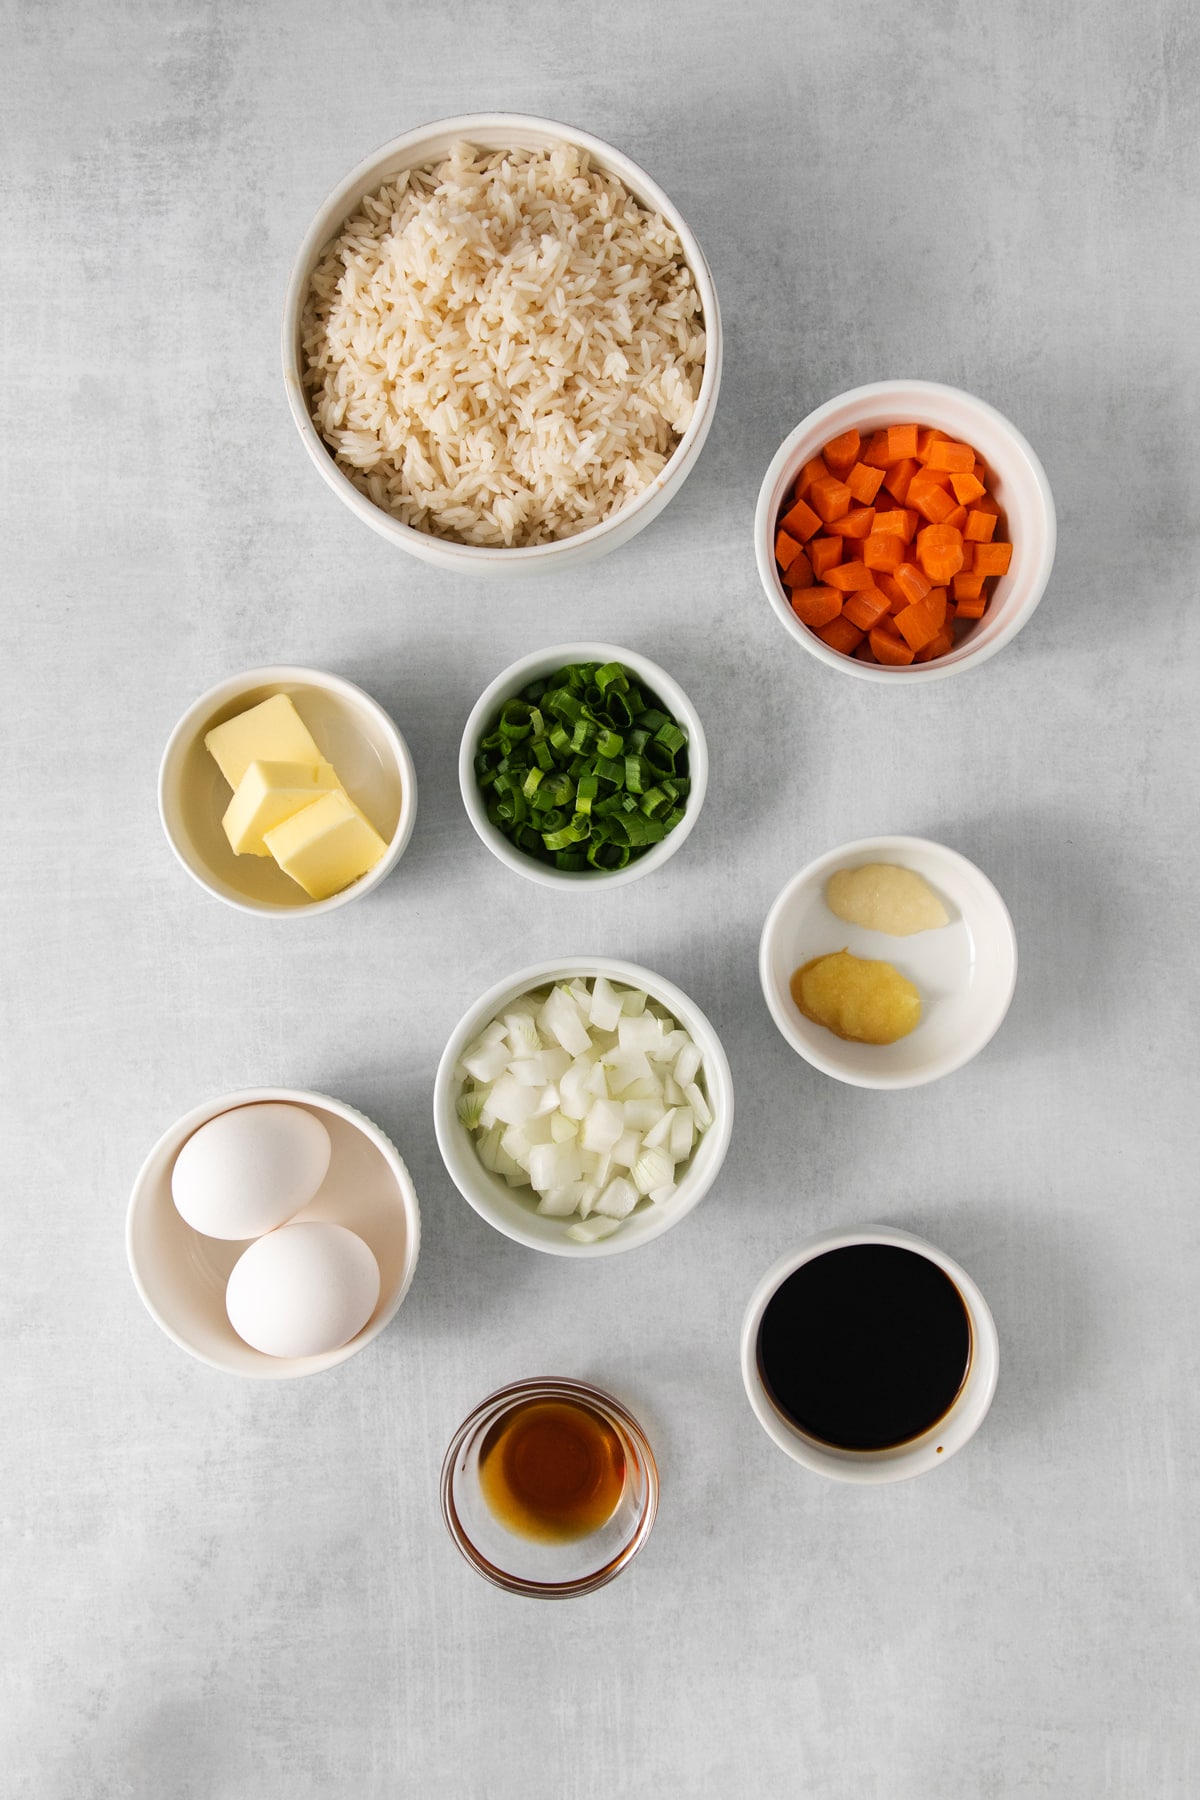 Ingredients for Easy Egg Fried Rice are sesame oil, diced onion, diced carrots, grated garlic, grated ginger, butter, cooked rice, soy sauce, and beaten eggs